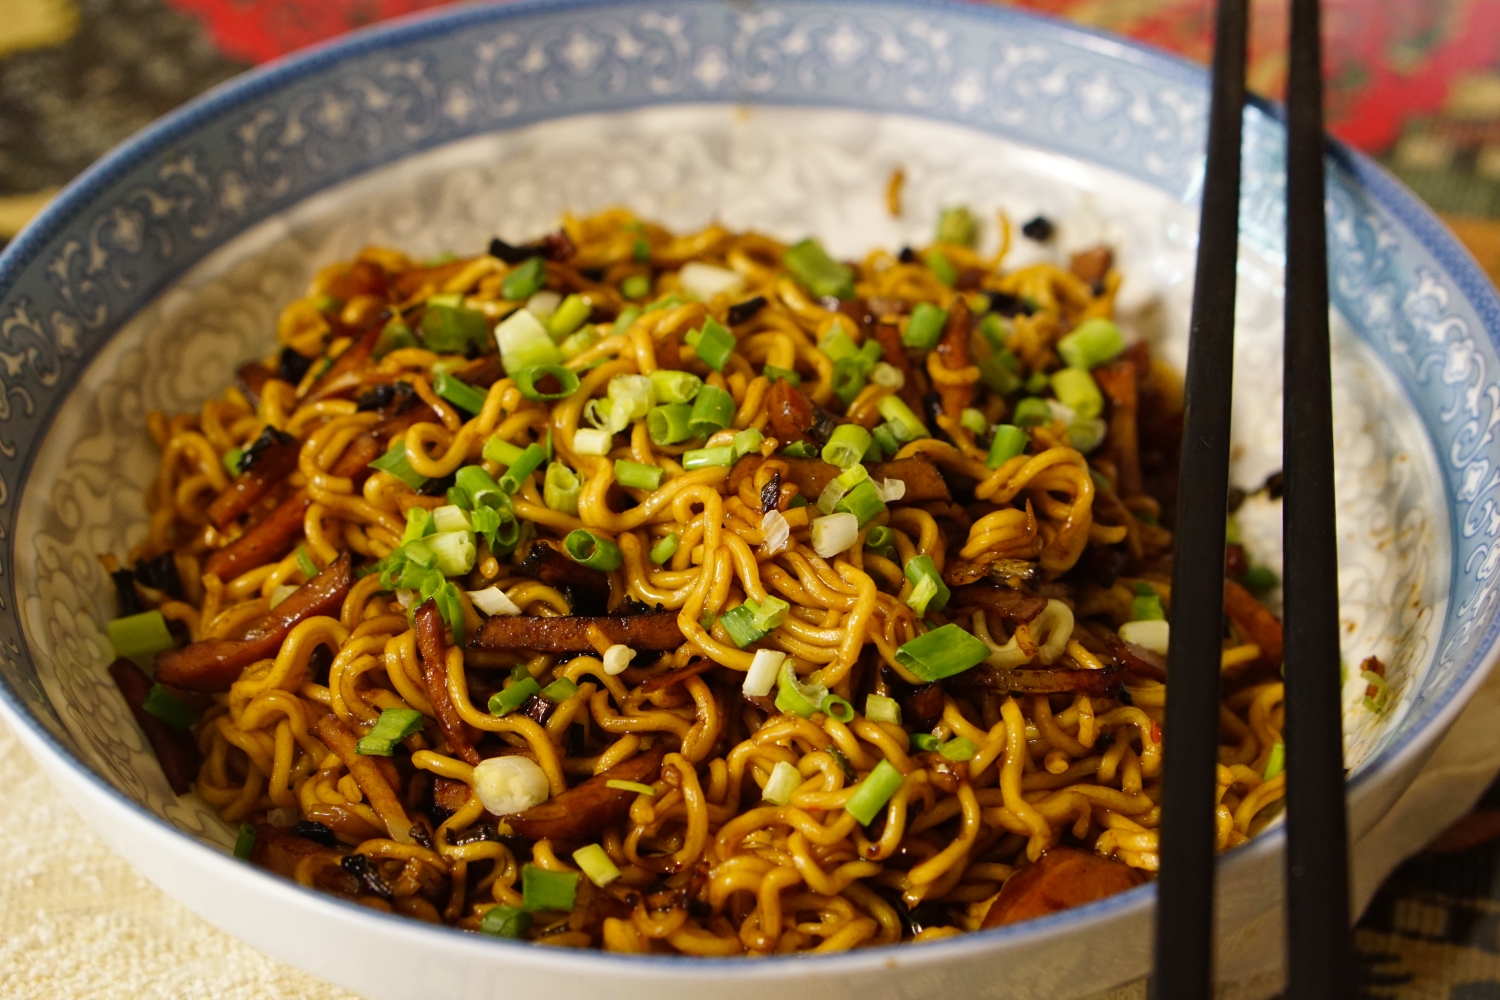 
Fight the way of chow mien absolutely, kill chow mien how to be done absolutely delicious